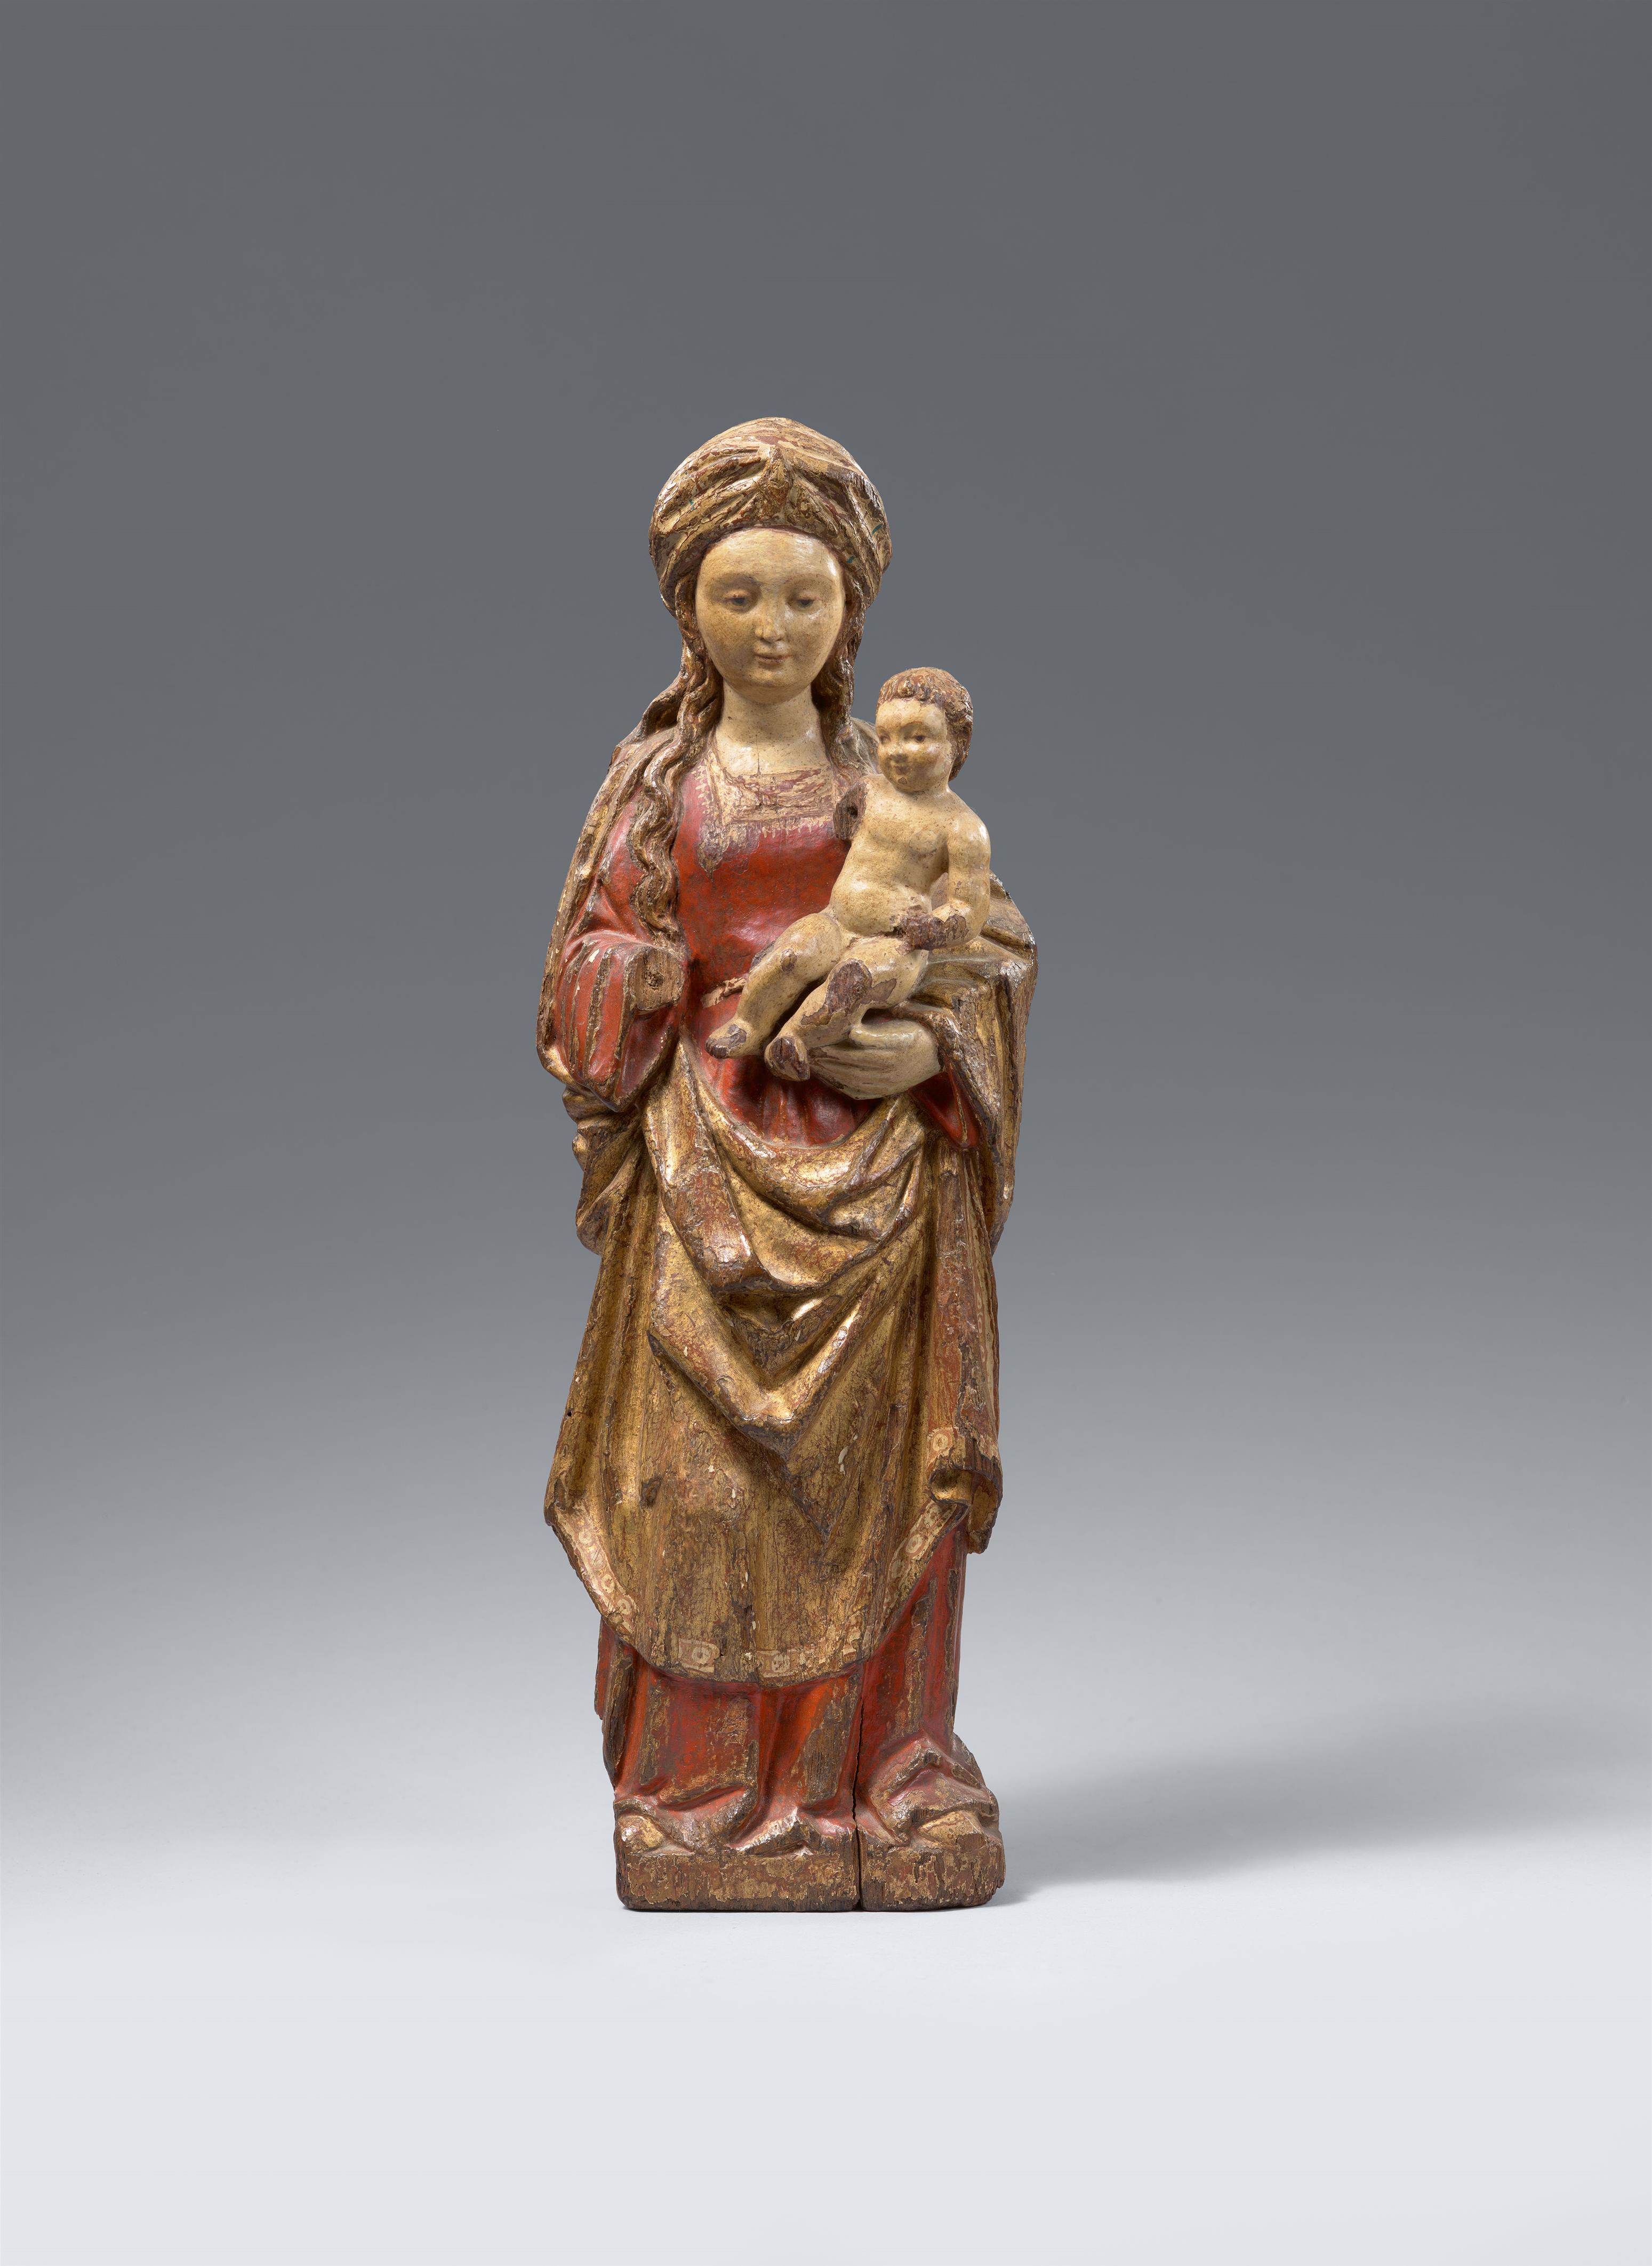 Probably Brabant around 1450/1460 - A figure of the Virgin and Child, presumably Brabant, around 1450/60 - image-1